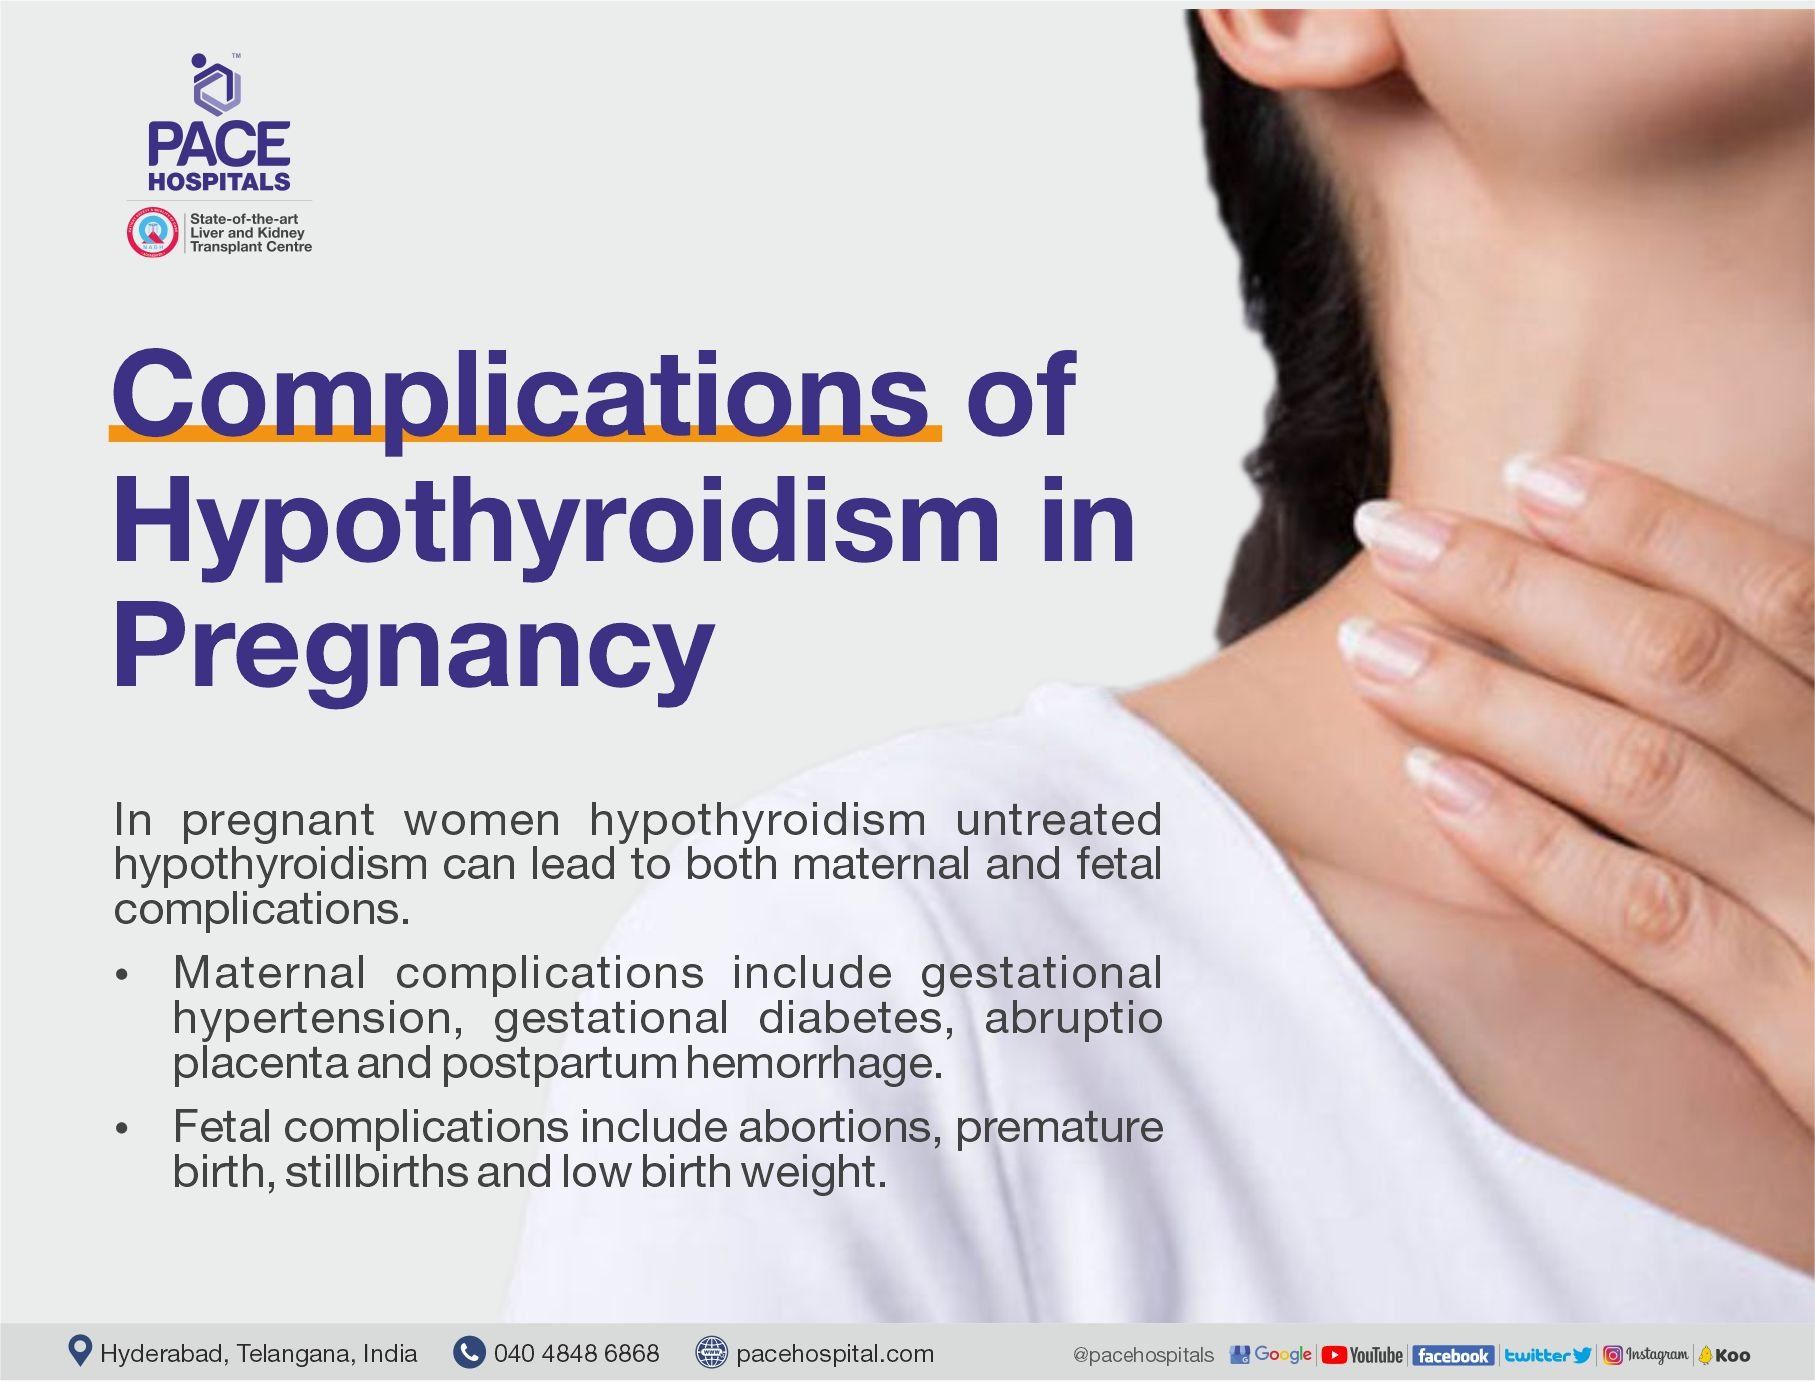 Complications, Risk or Effect of hypothyroidism in pregnancy | Pace Hospitals